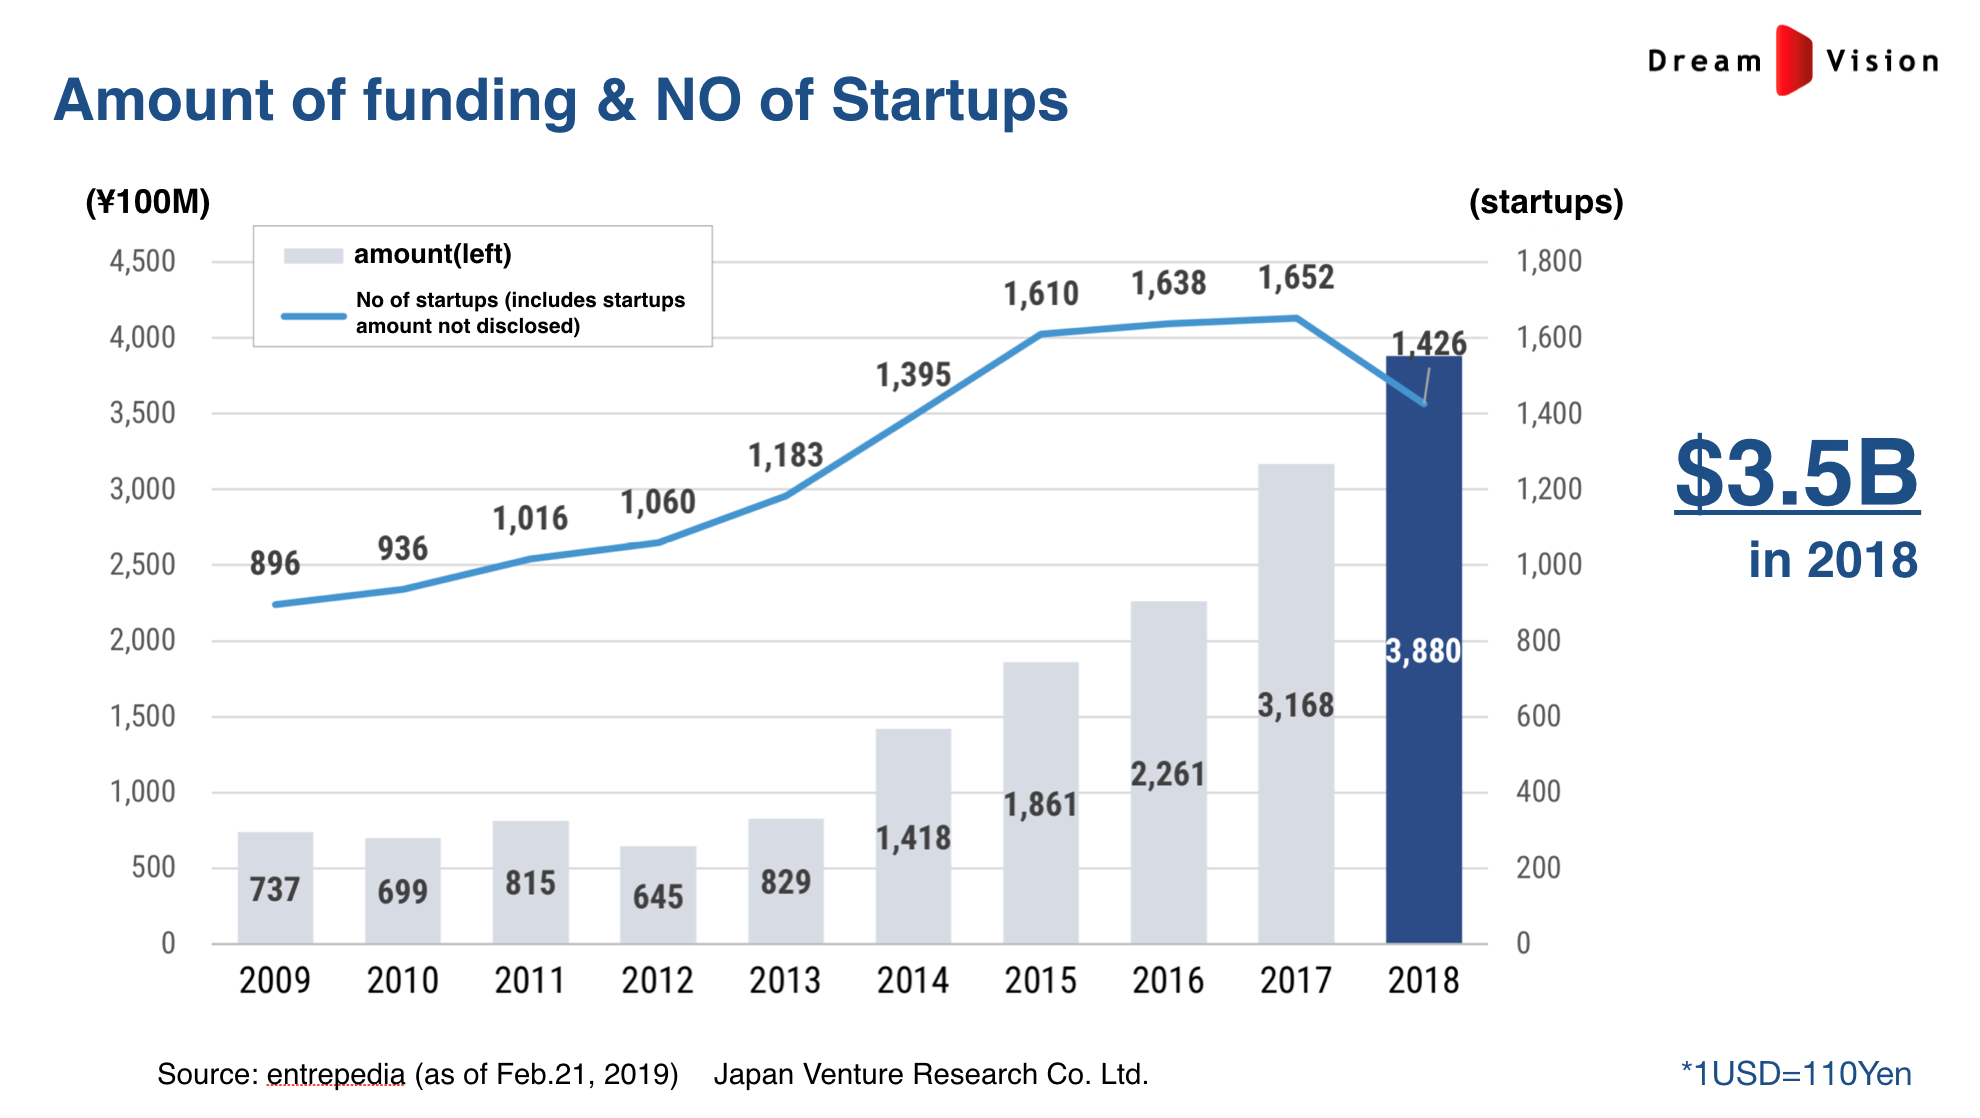 The amount of funding and number of startups in Japan 